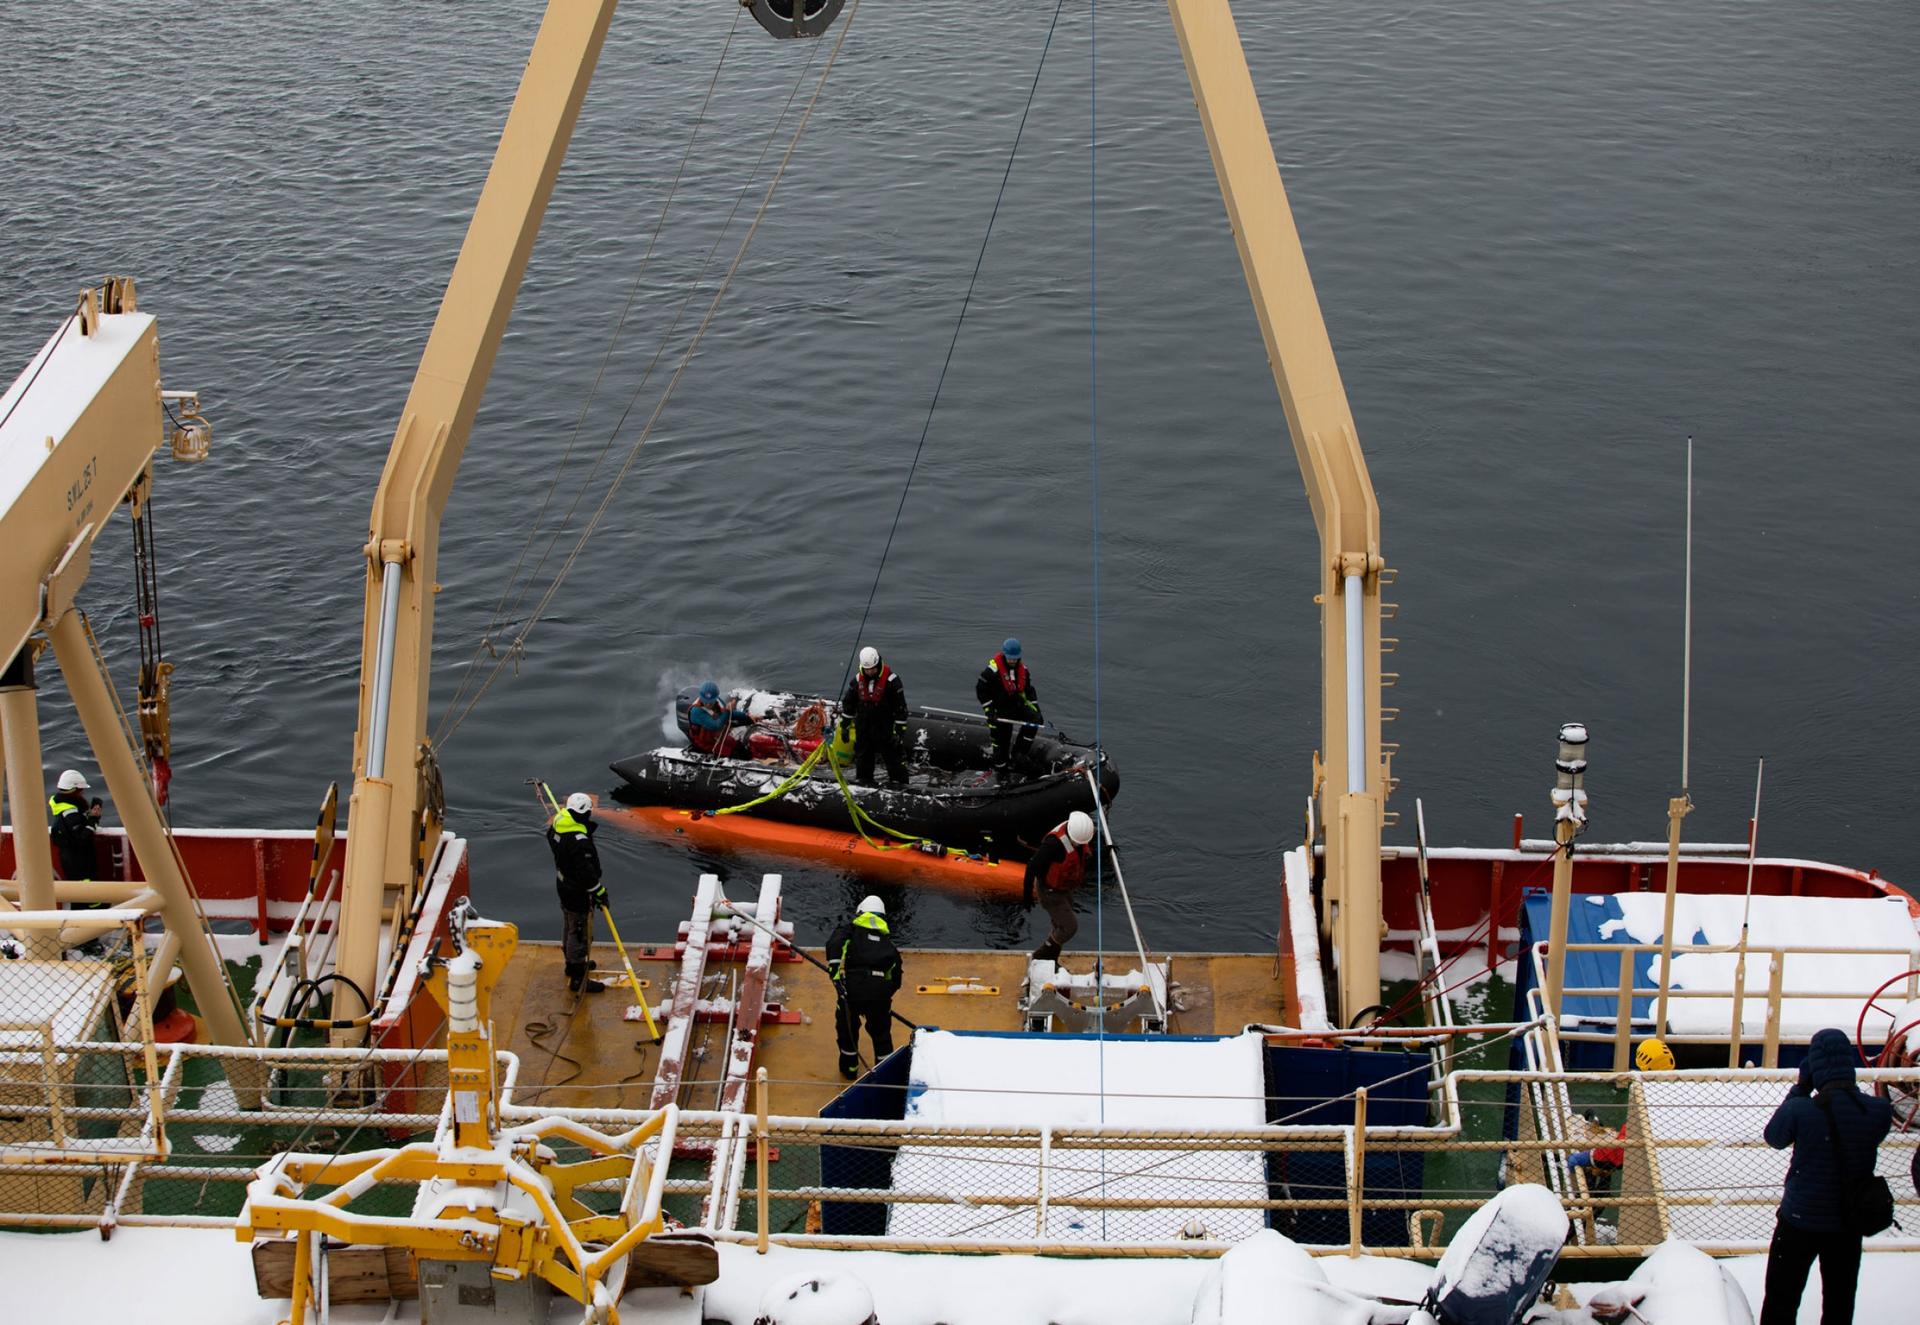 The Hugin submarine is shown getting tied to a winch cable.